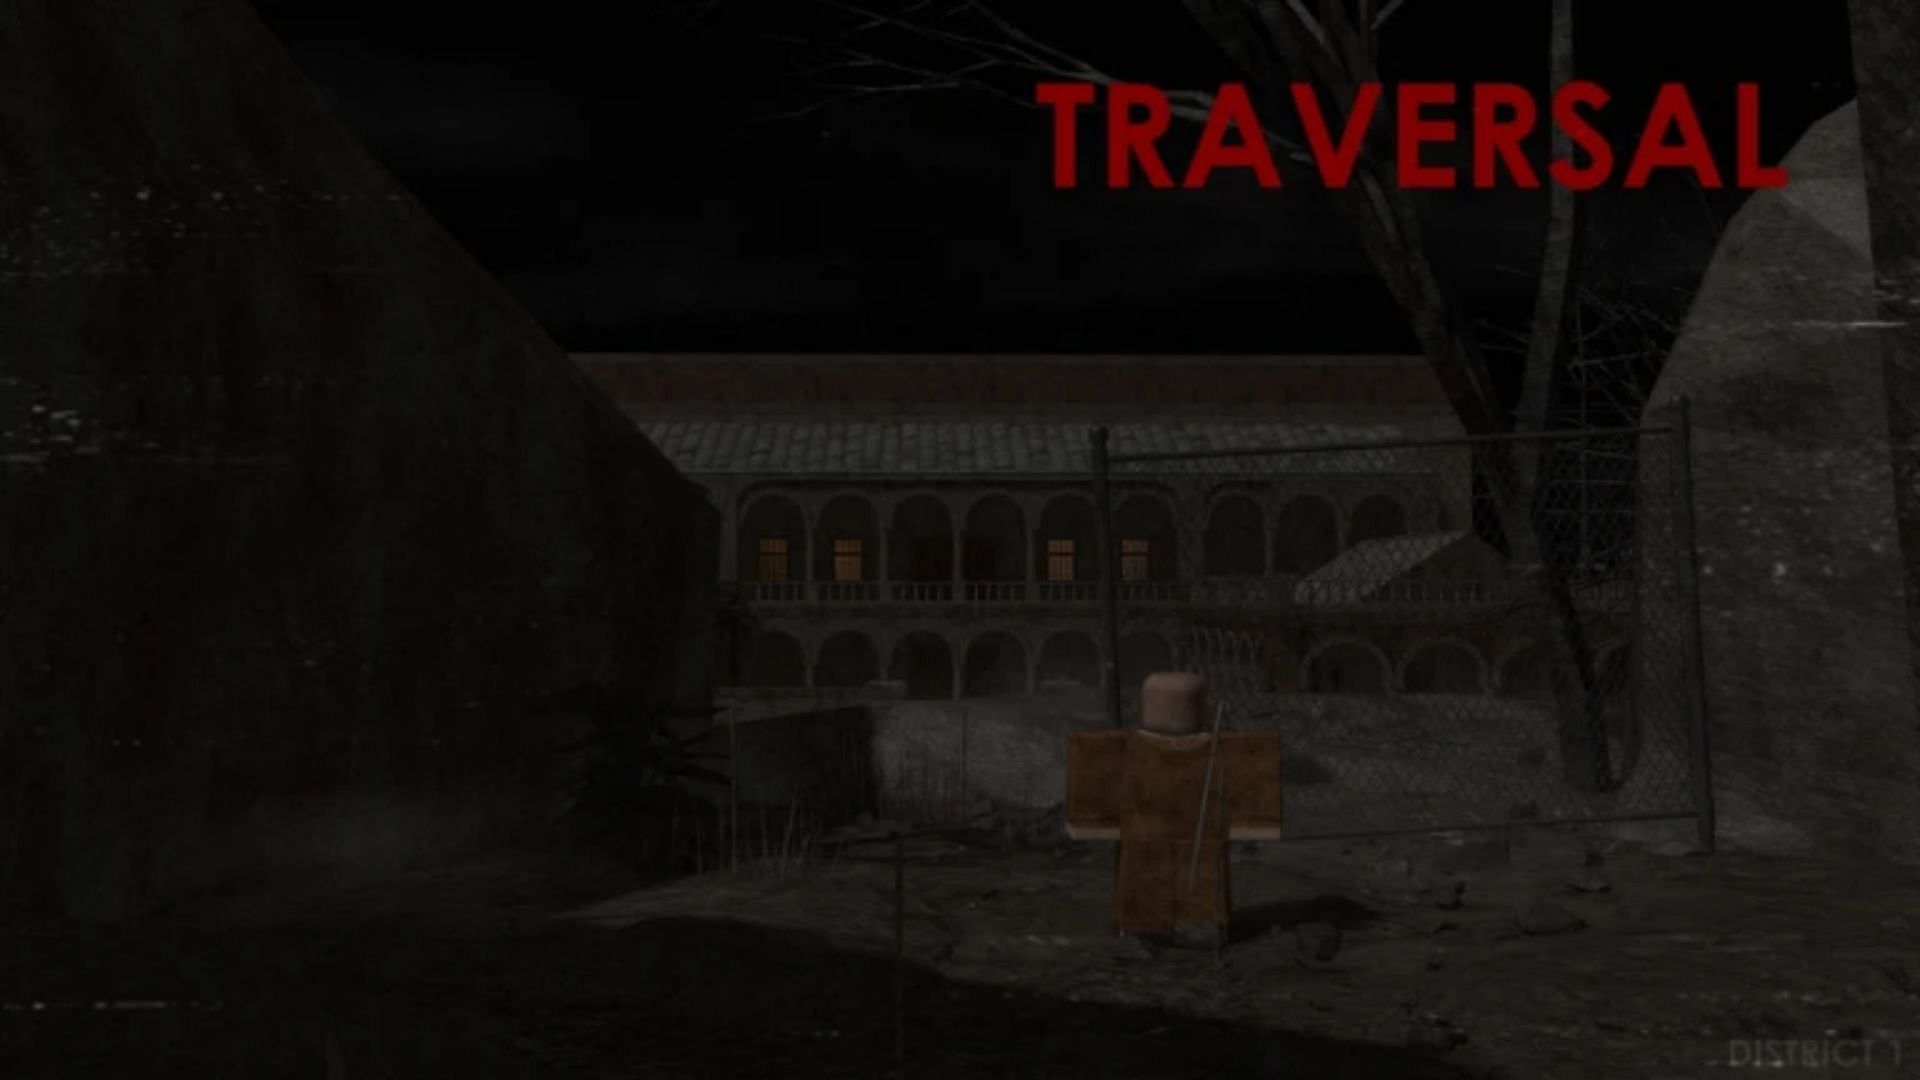 Official Traversal cover art (Image via Roblox)